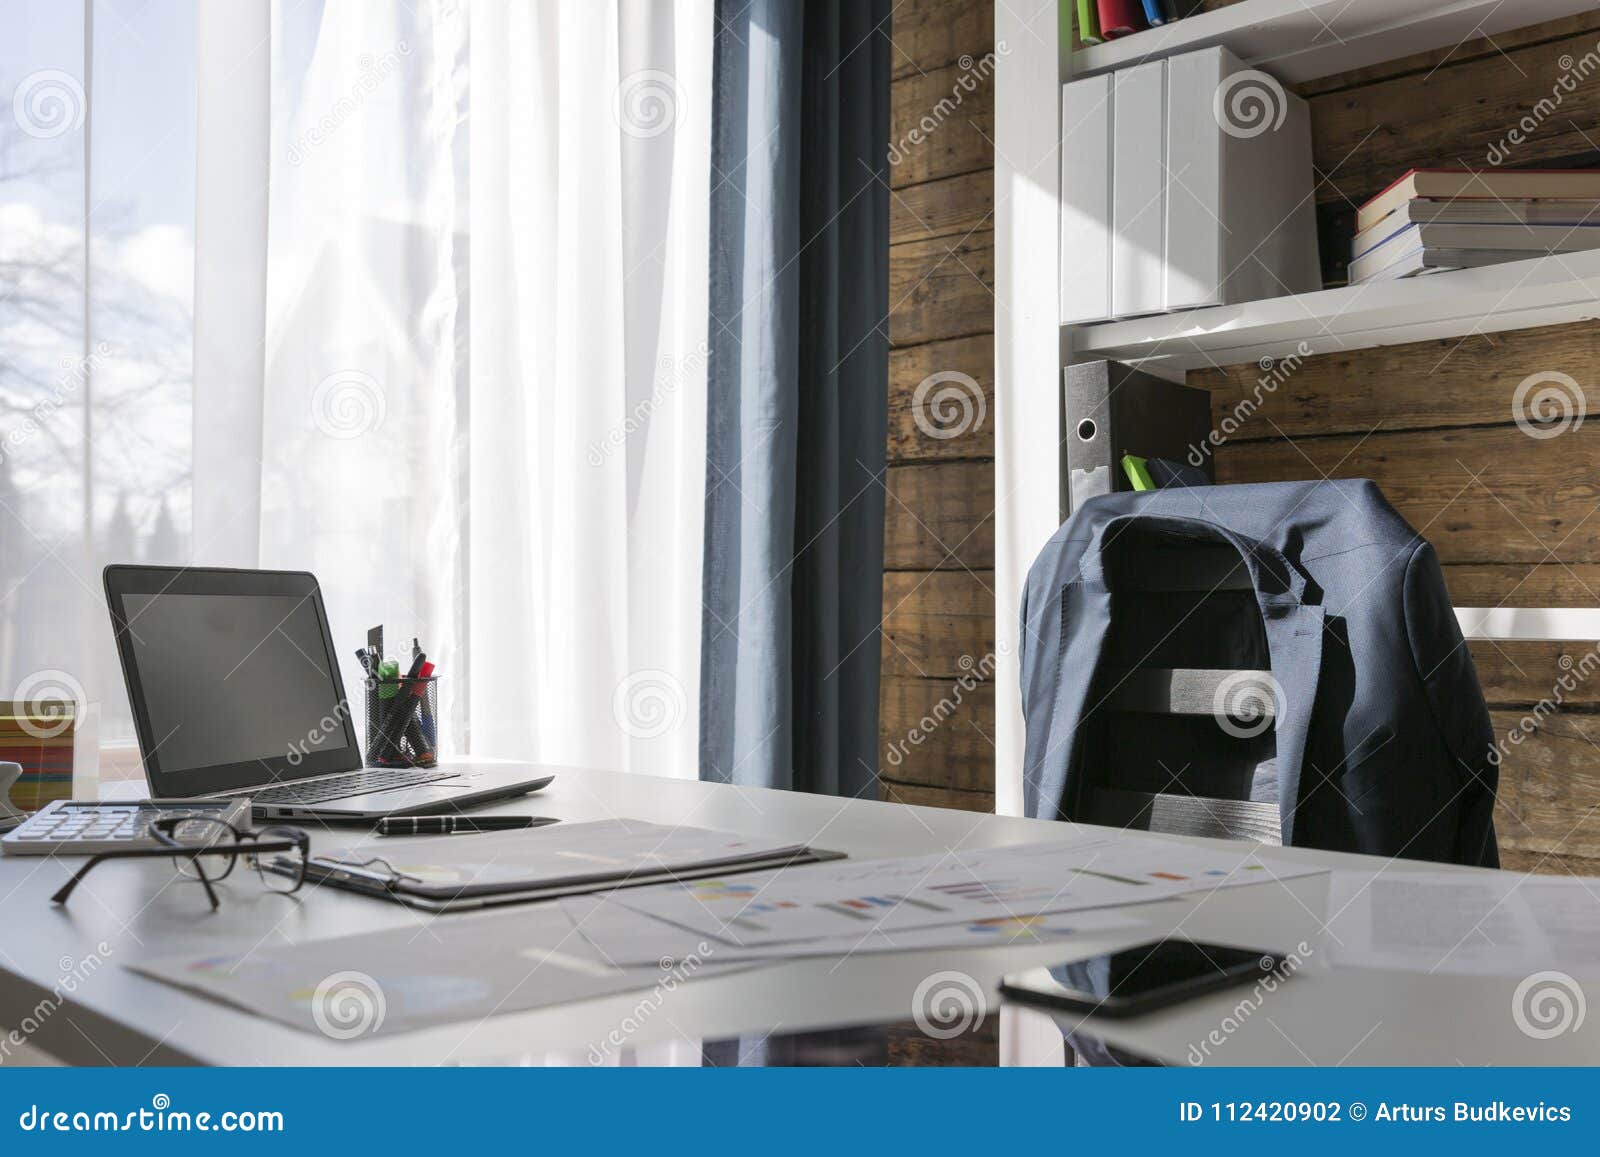 empty workplace with office desk and chair, jacket on the chair,